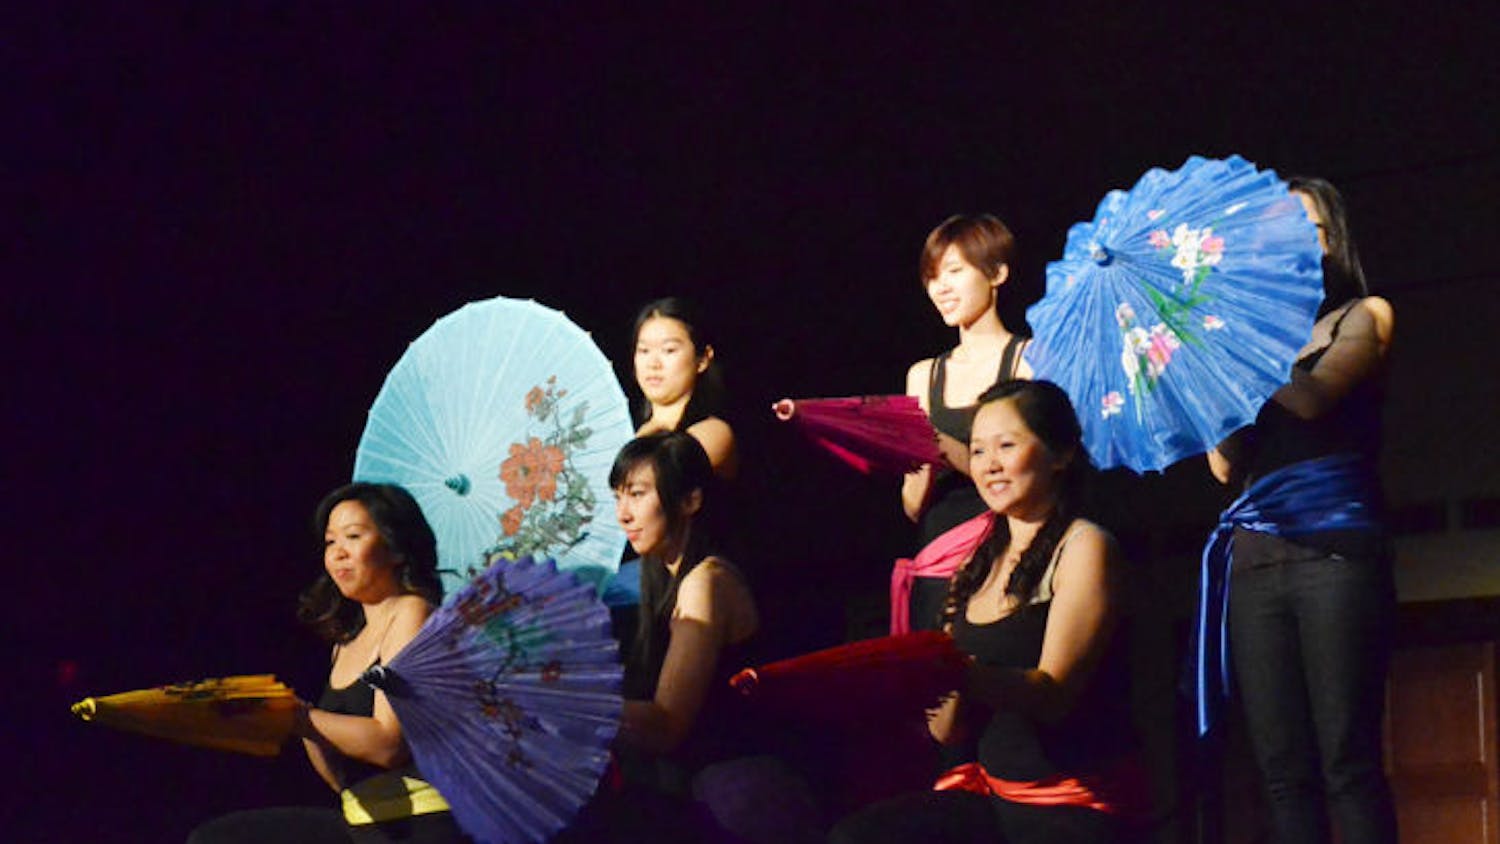 Members of the Chinese Asian Student Association perform the Umbrella dance, a traditional Chinese dance, at the Chinese New Year Festival 2013: Enter the Unknown in the Reitz Union Grand Ballroom on Saturday.